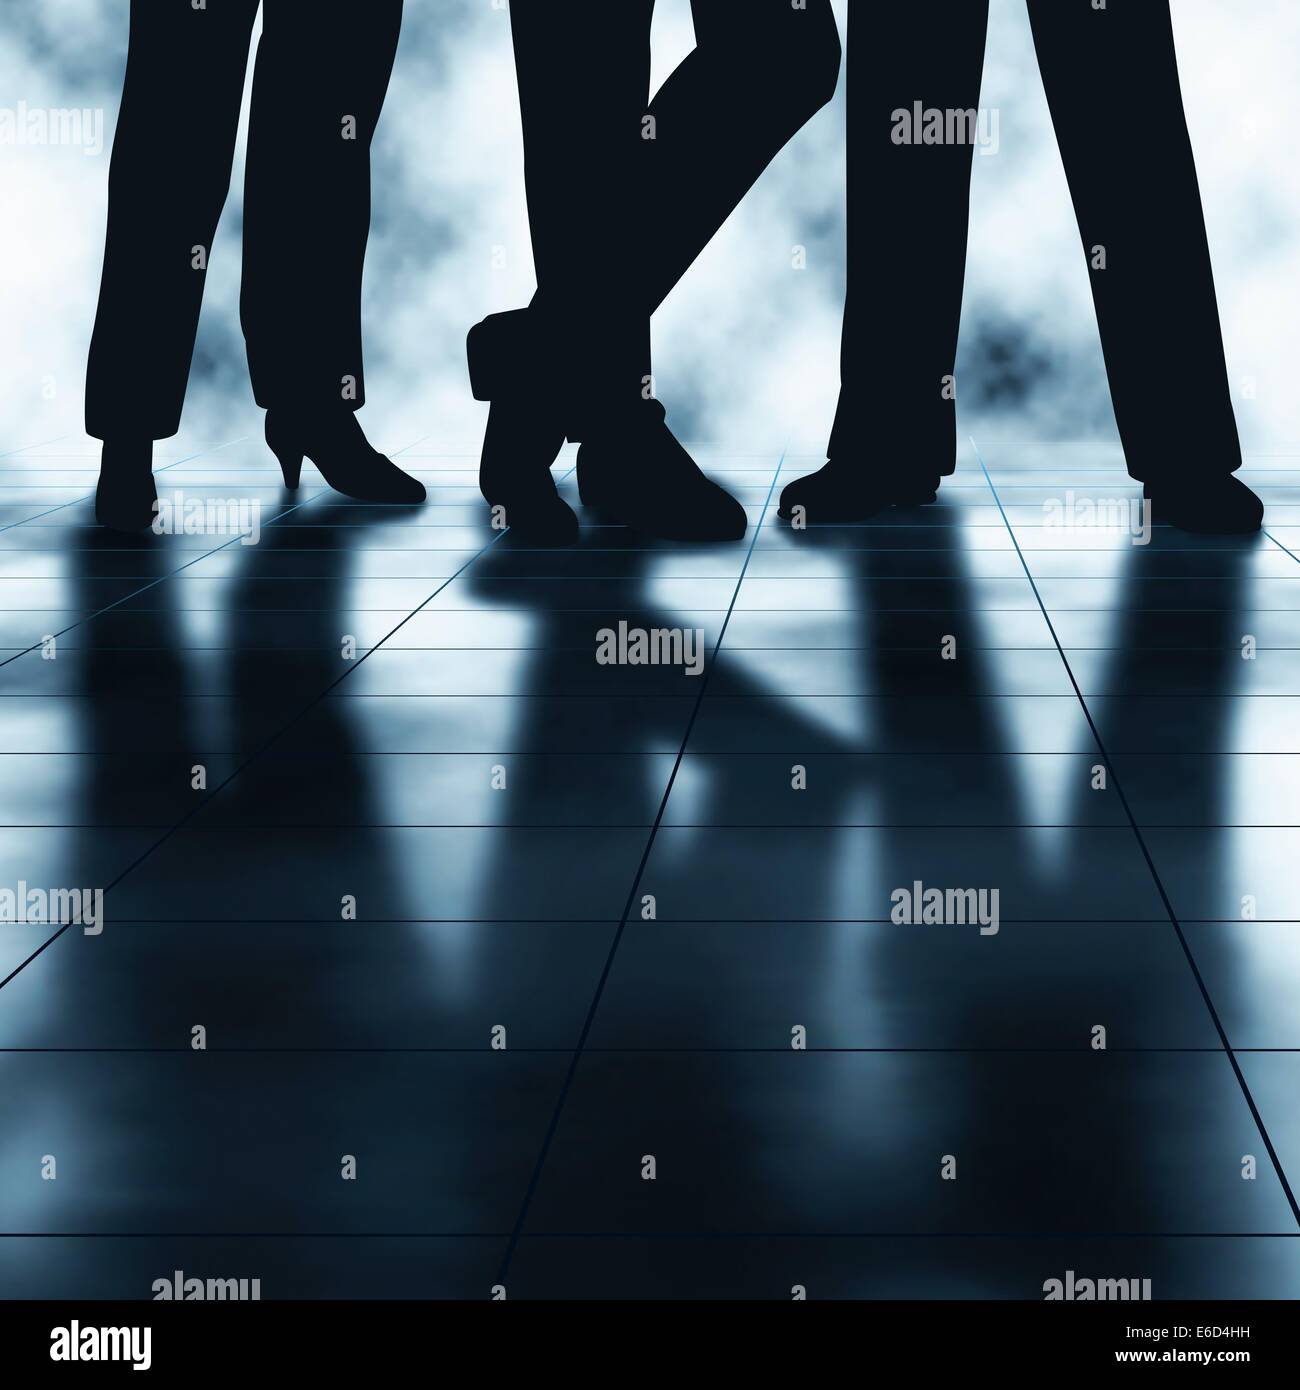 Editable vector illustration of the legs and reflections of three businesspeople made using a gradient mesh Stock Vector